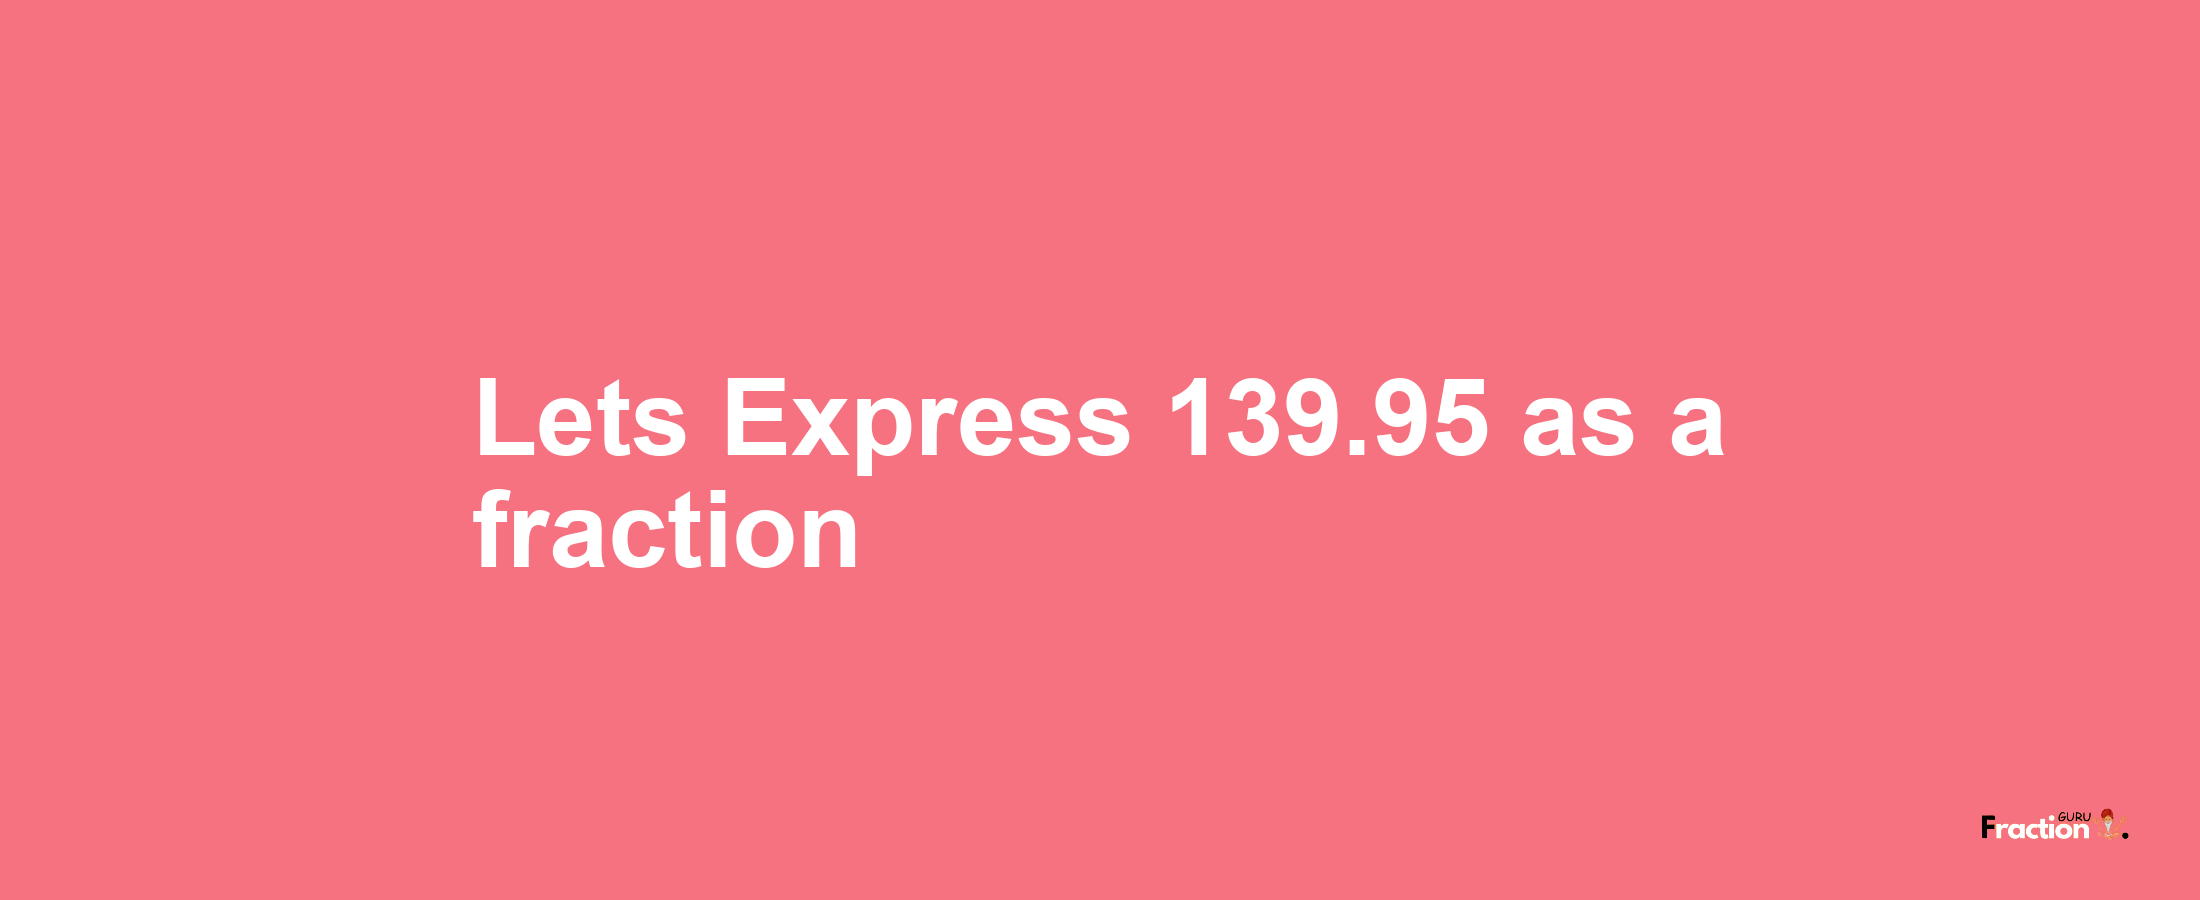 Lets Express 139.95 as afraction